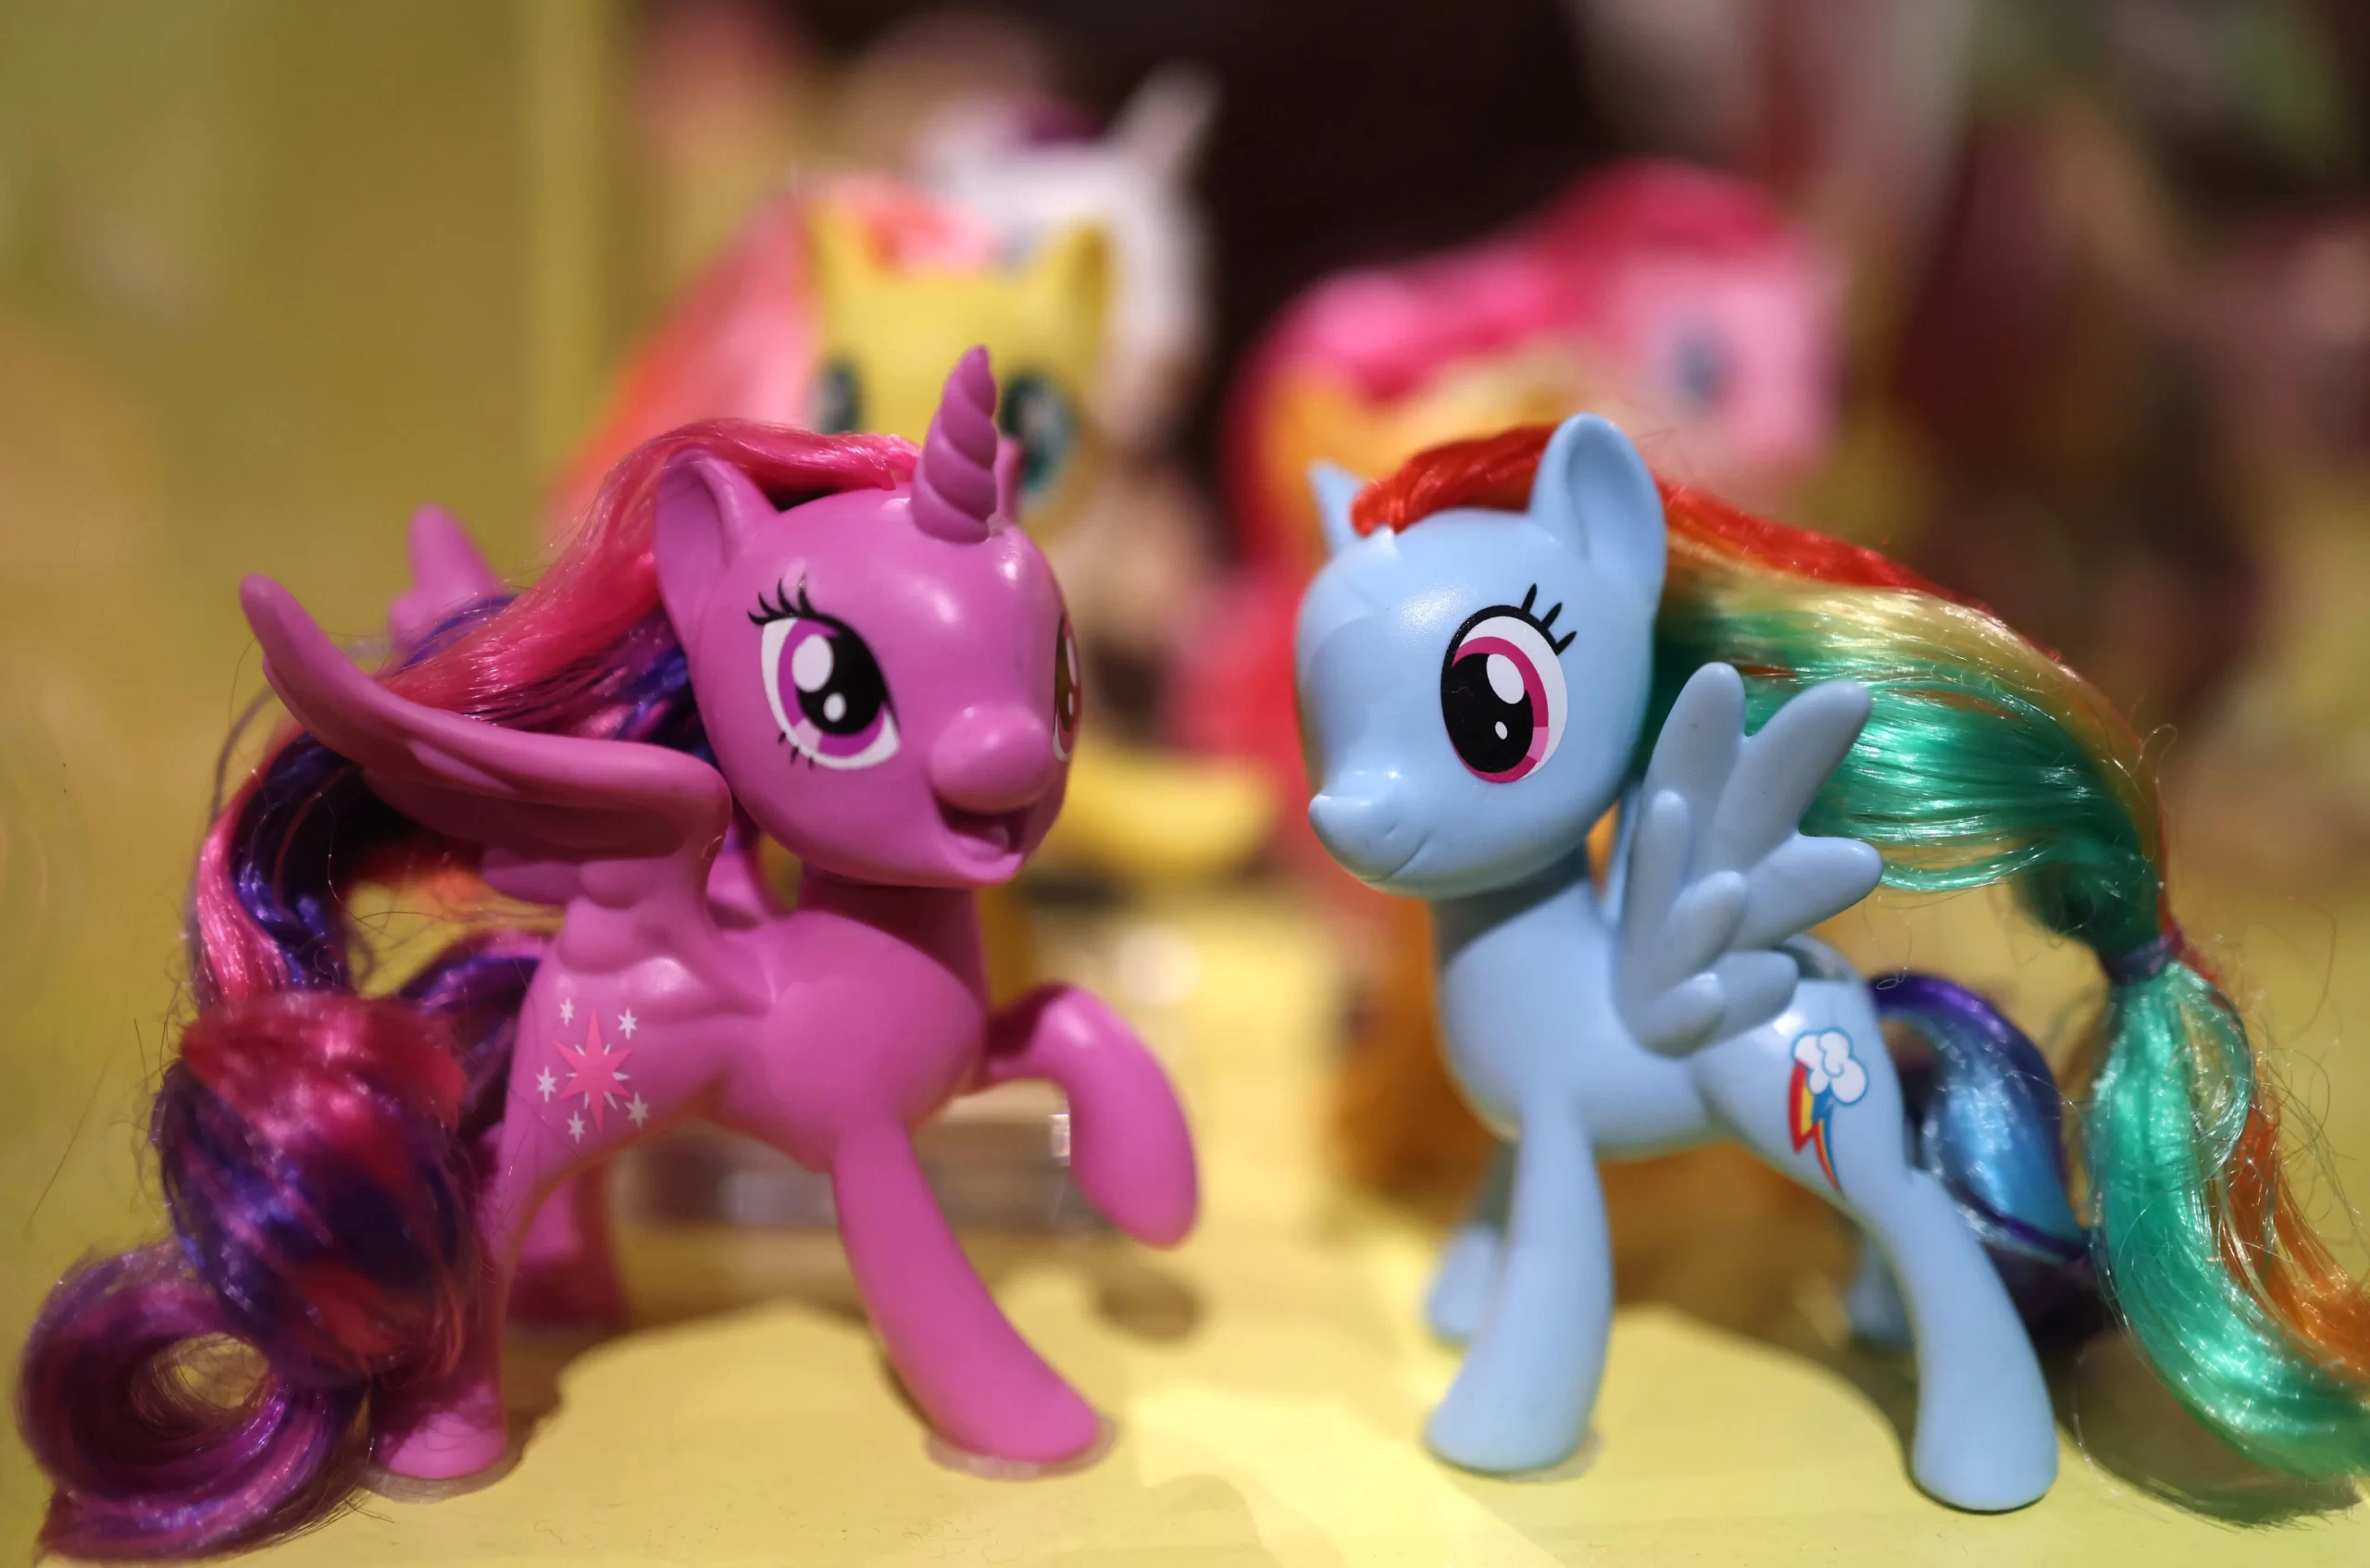 Russian Authorities Close 'My Little Pony' Convention, Accusing It of Promoting LGBTQ+ Propaganda: Report